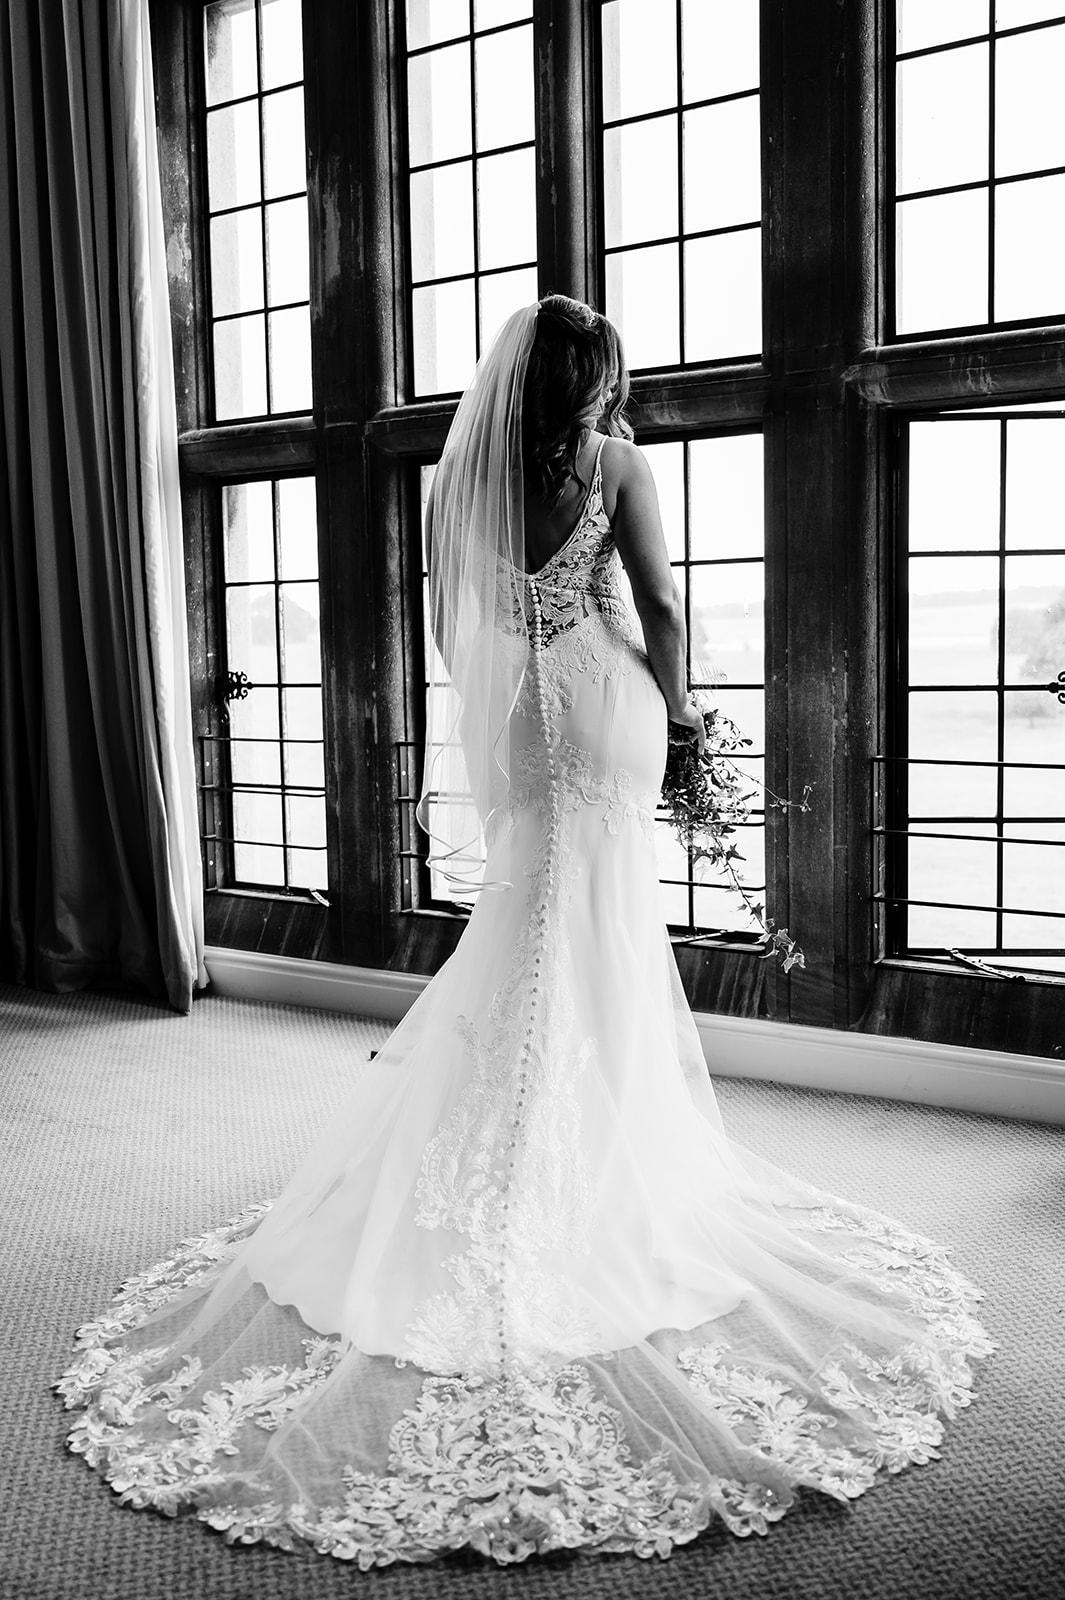 bride posing in front of the window in the bridal suite at stapleford park hotel by Amanda Forman Photography